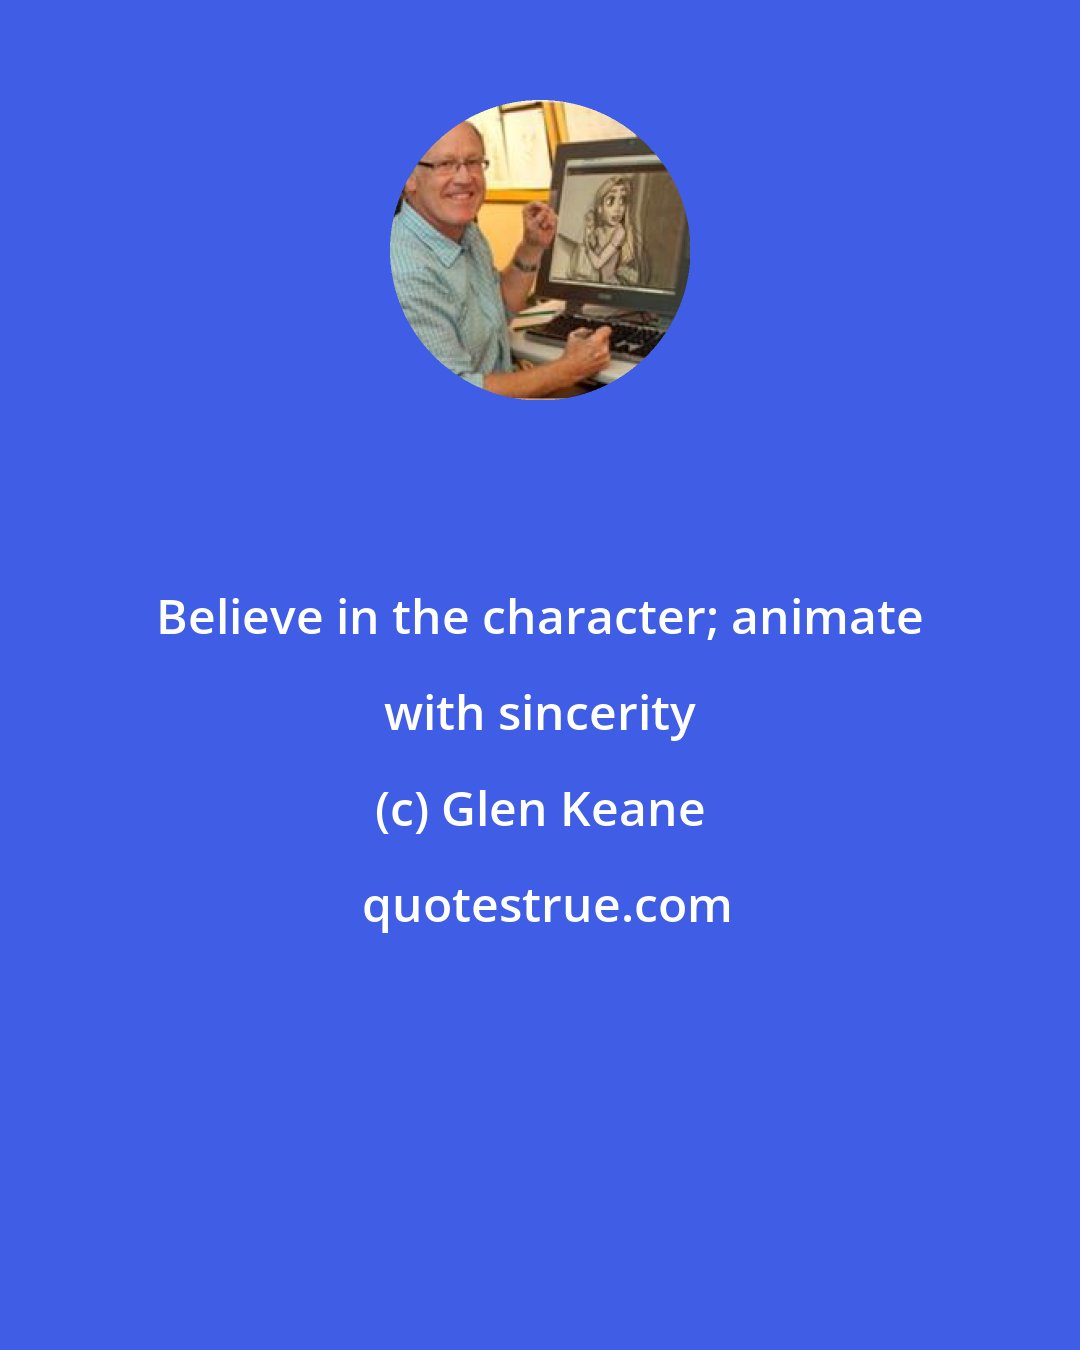 Glen Keane: Believe in the character; animate with sincerity